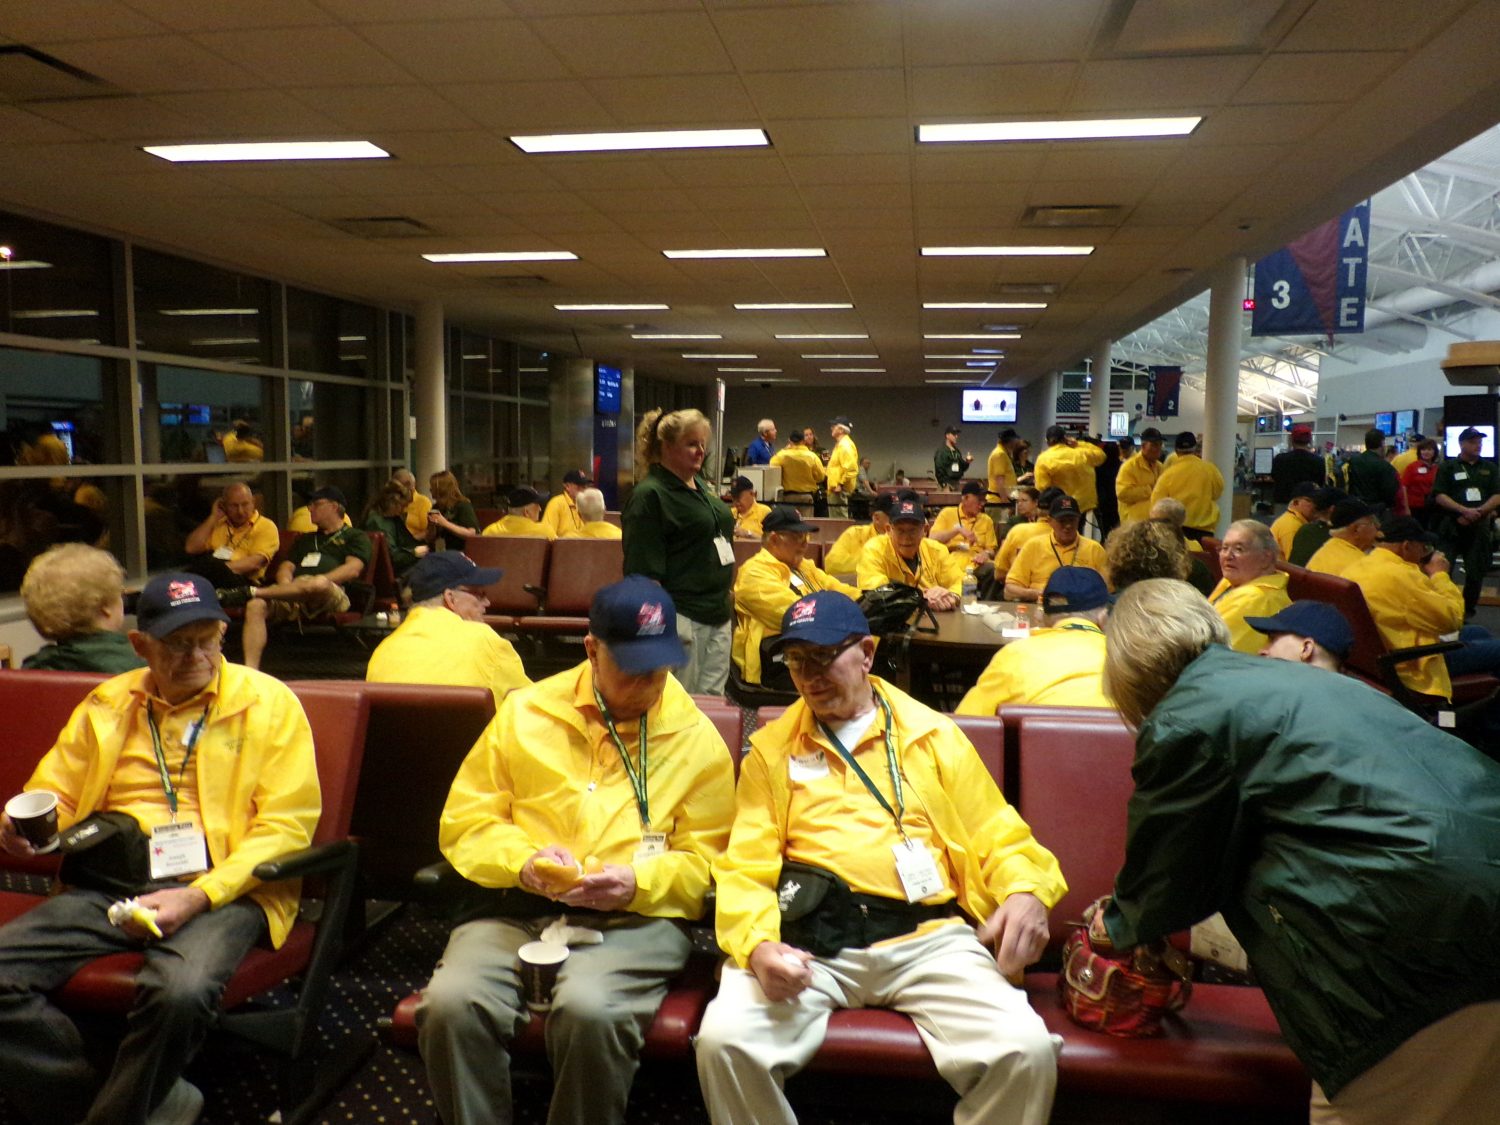 Countdown to take-off for honor flight veterans